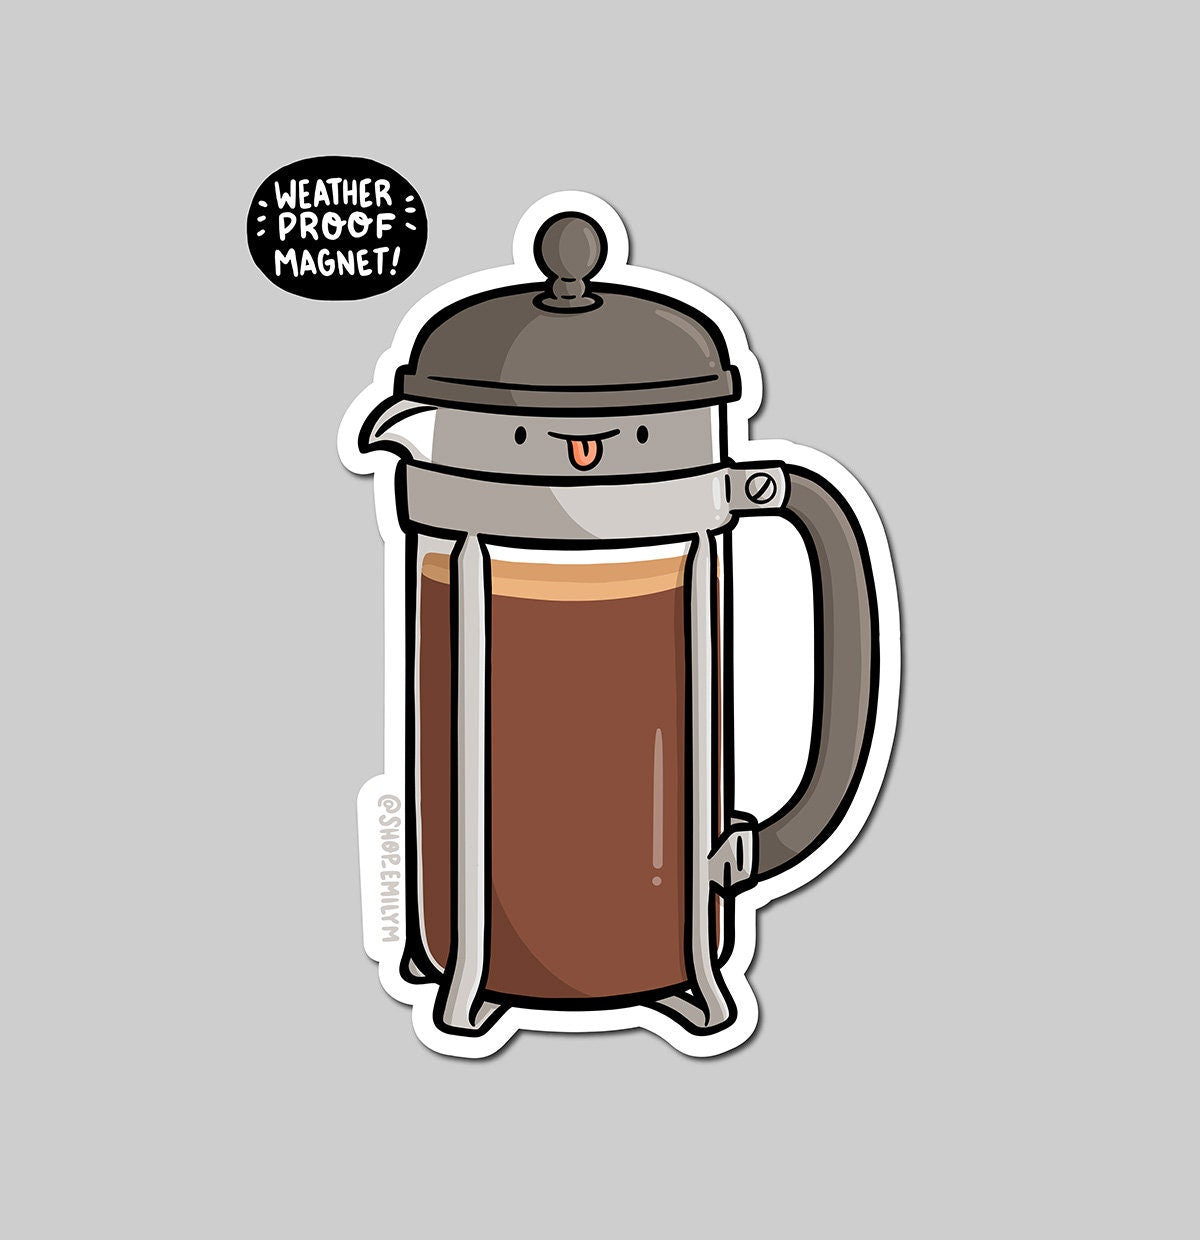 French Press Magnet